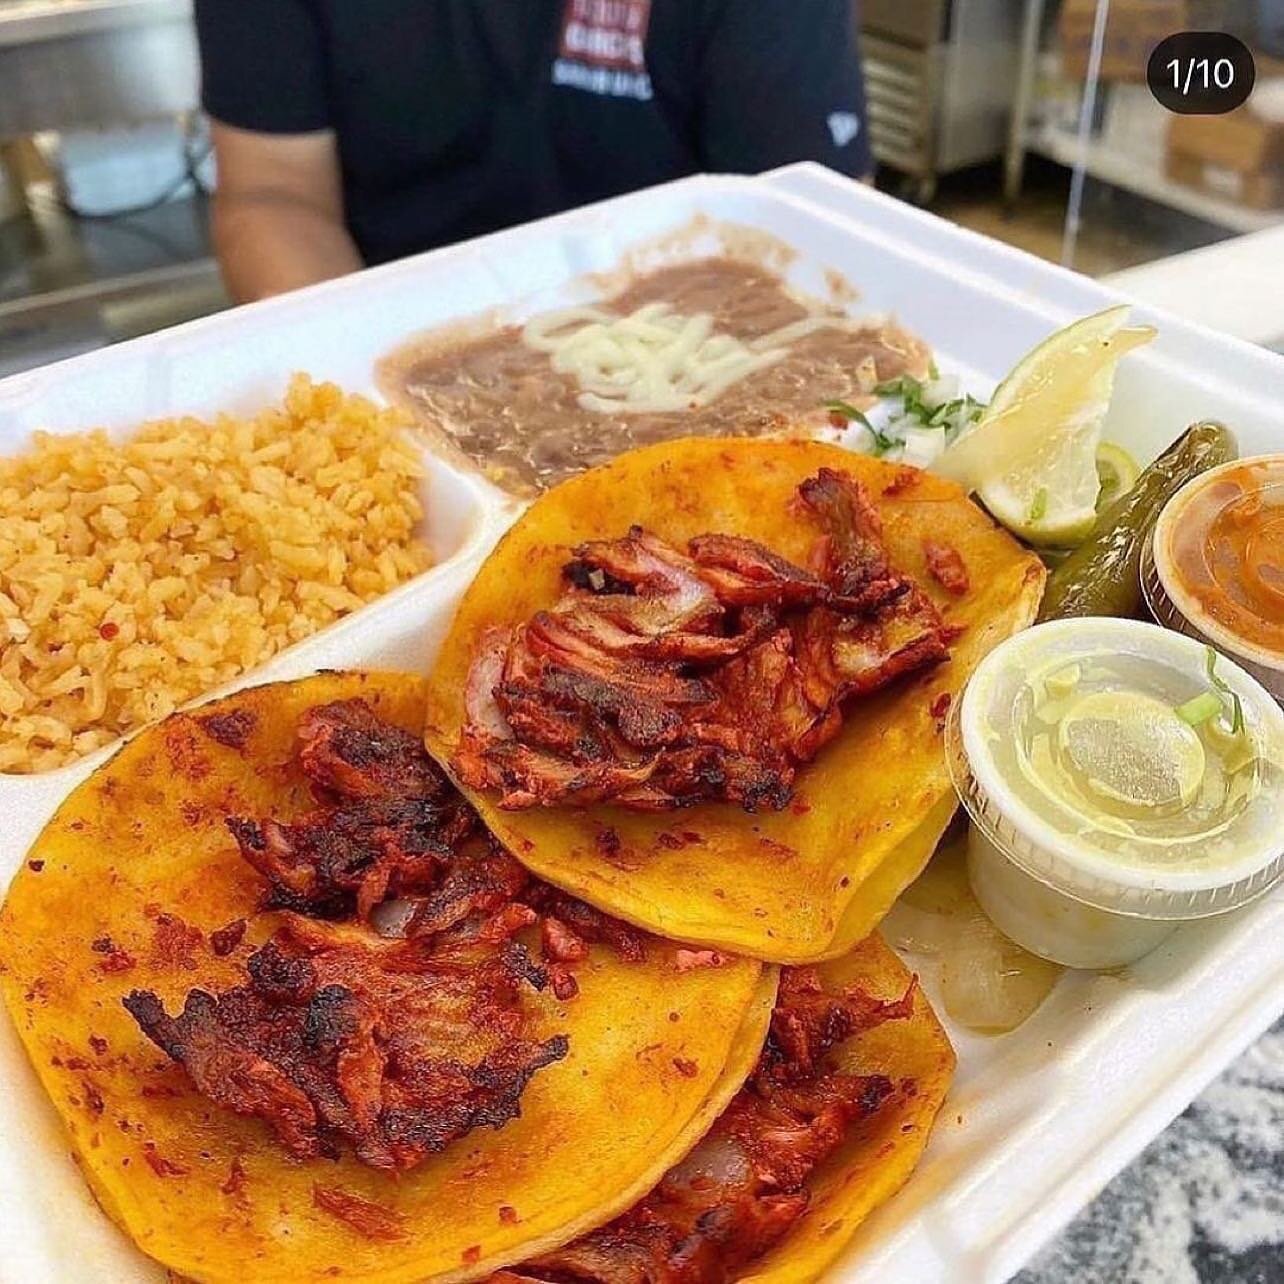 ‼️NOW OPEN NEW LOCATION IN MESQUITE, TX ‼️ 

A Gas Station Taqueria that serves all of these:
🔥Trompo 
🔥Tacos
🔥Burgers
🔥Trompo Tacos
🔥Chicken Tacos
🔥Beef Quesadilla
and more‼️

🚗FOR DELIVERY or PICKUP
📲SEE OUR MENU at taqueriagarcias.com
☎️Ca